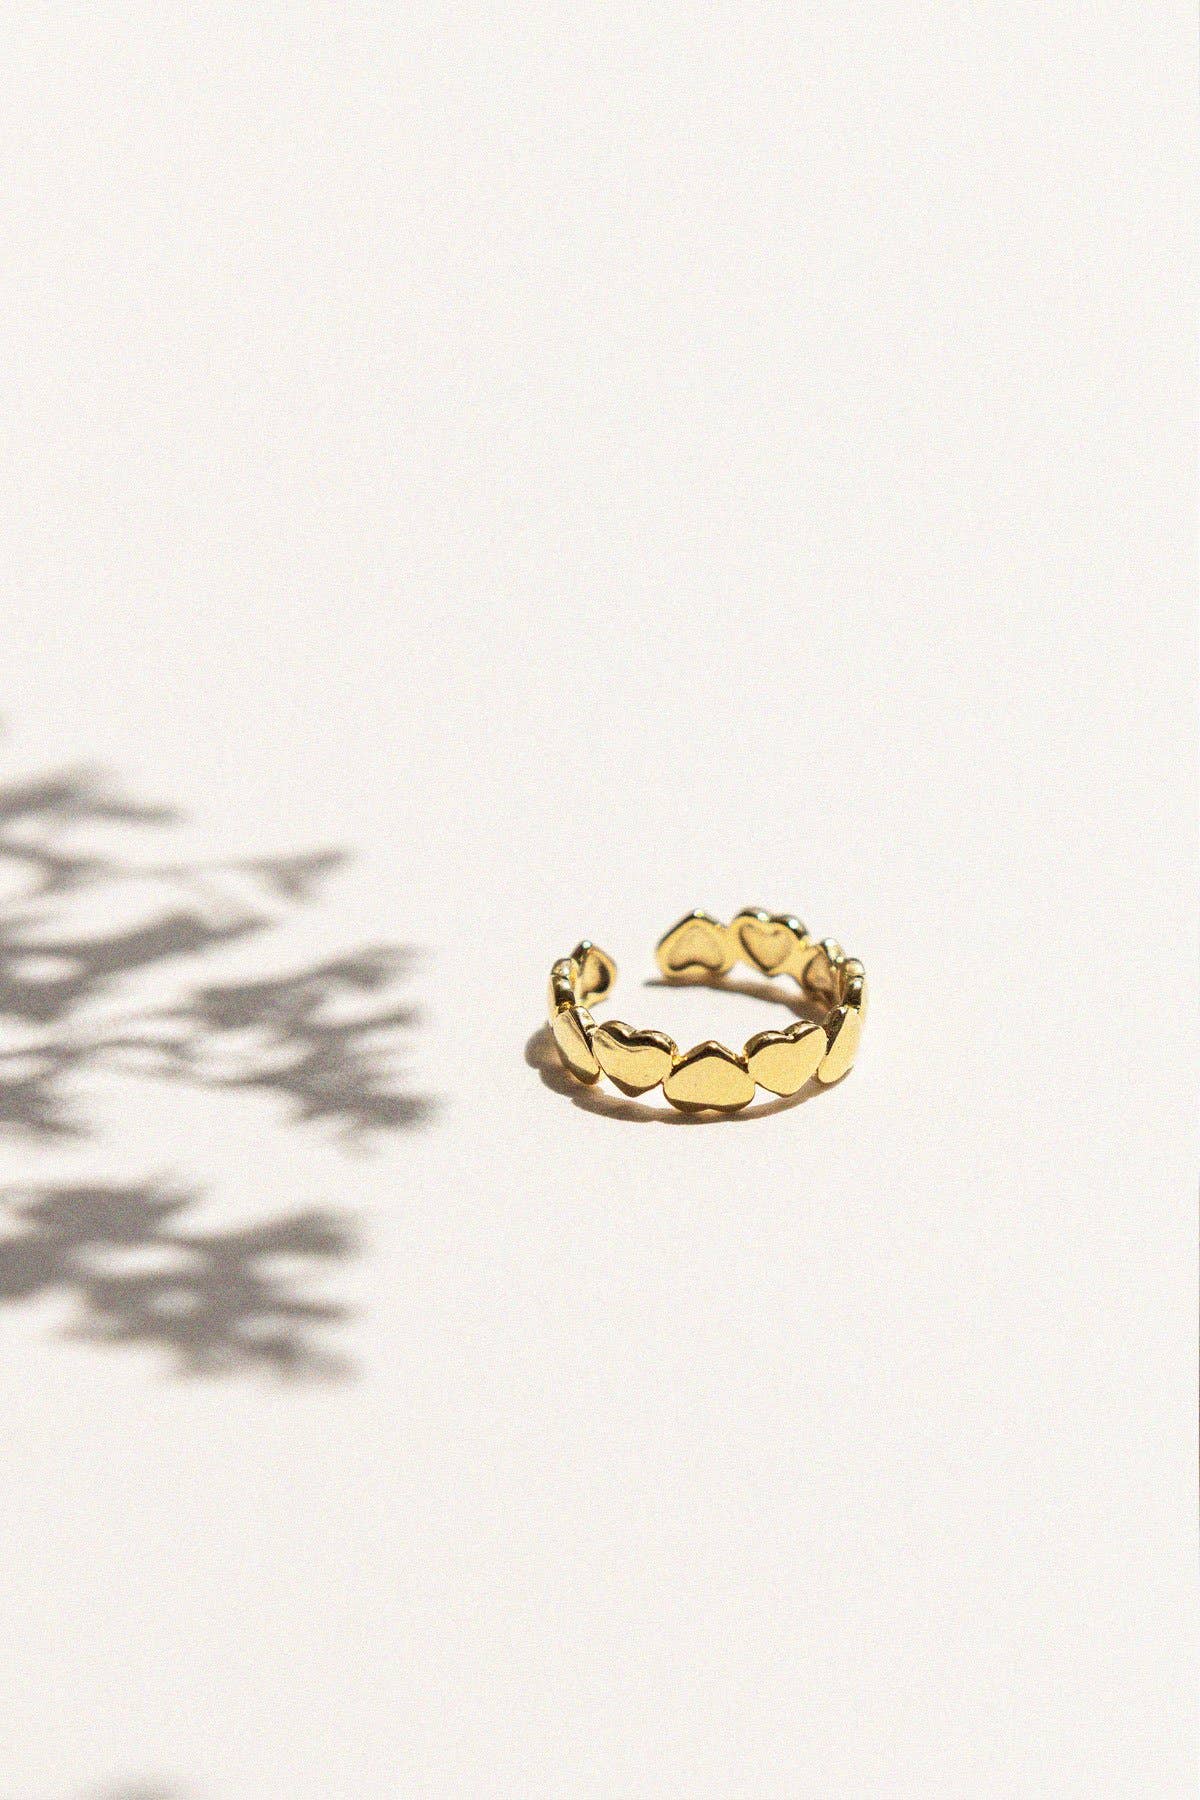 Gold plated ring, hearts